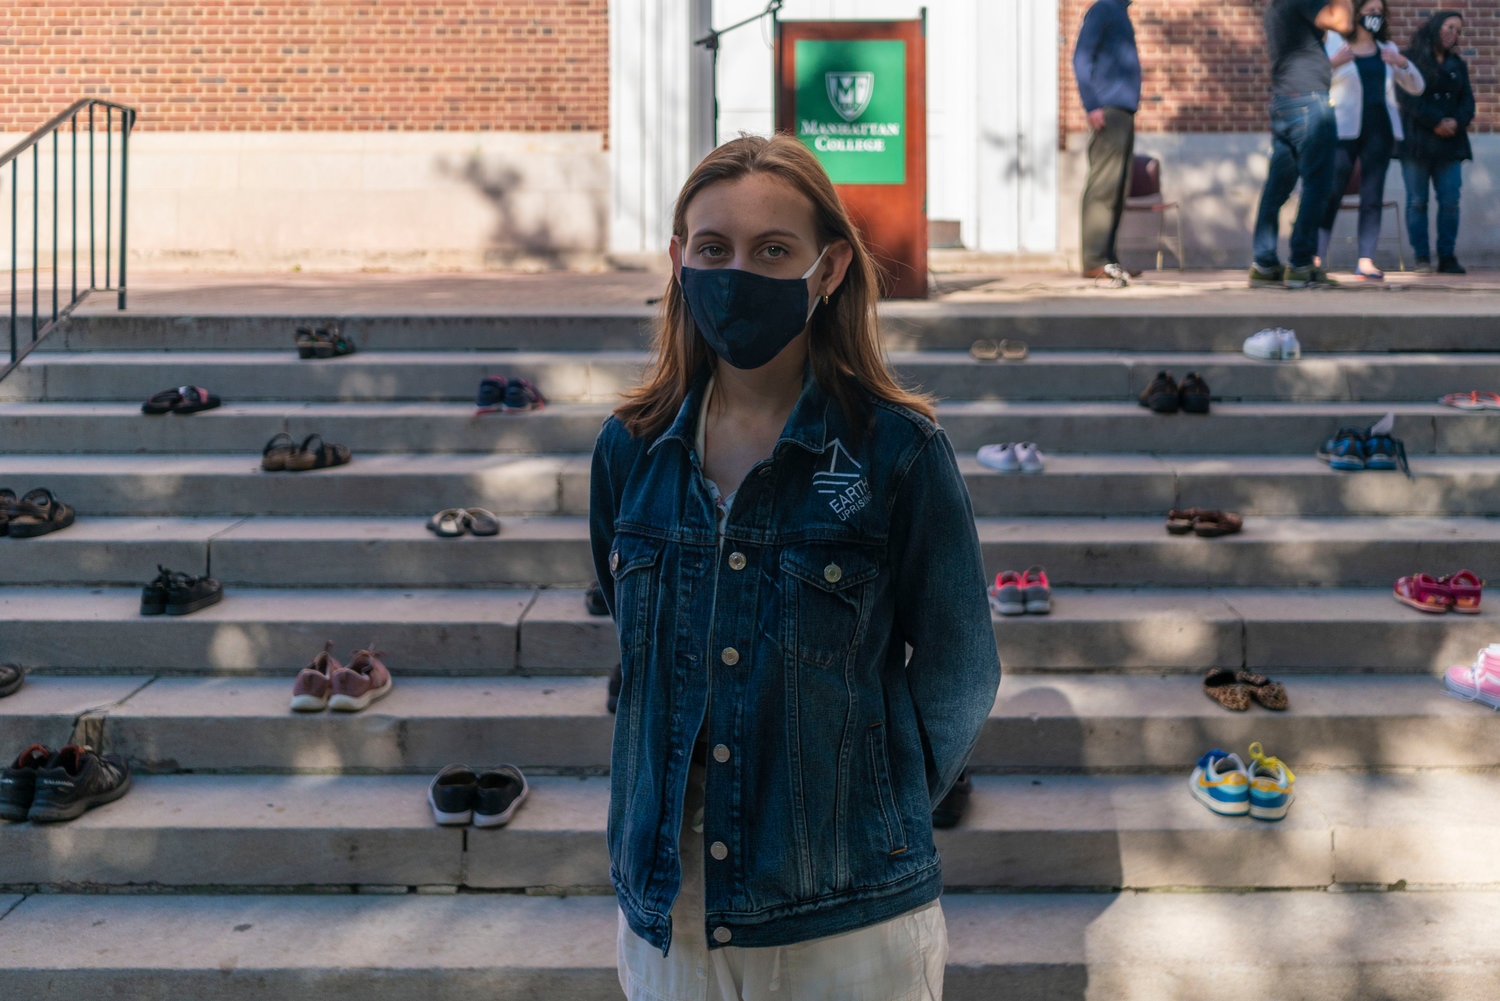 Alexandria Villaseñor, 15, delivers an impassioned speech at Manhattan College’s ‘shoe strike’ Sept. 22. The strike was held during Climate Week NYC, aiming to raise awareness about climate change in the same spirit as last year’s Global Climate Strike.